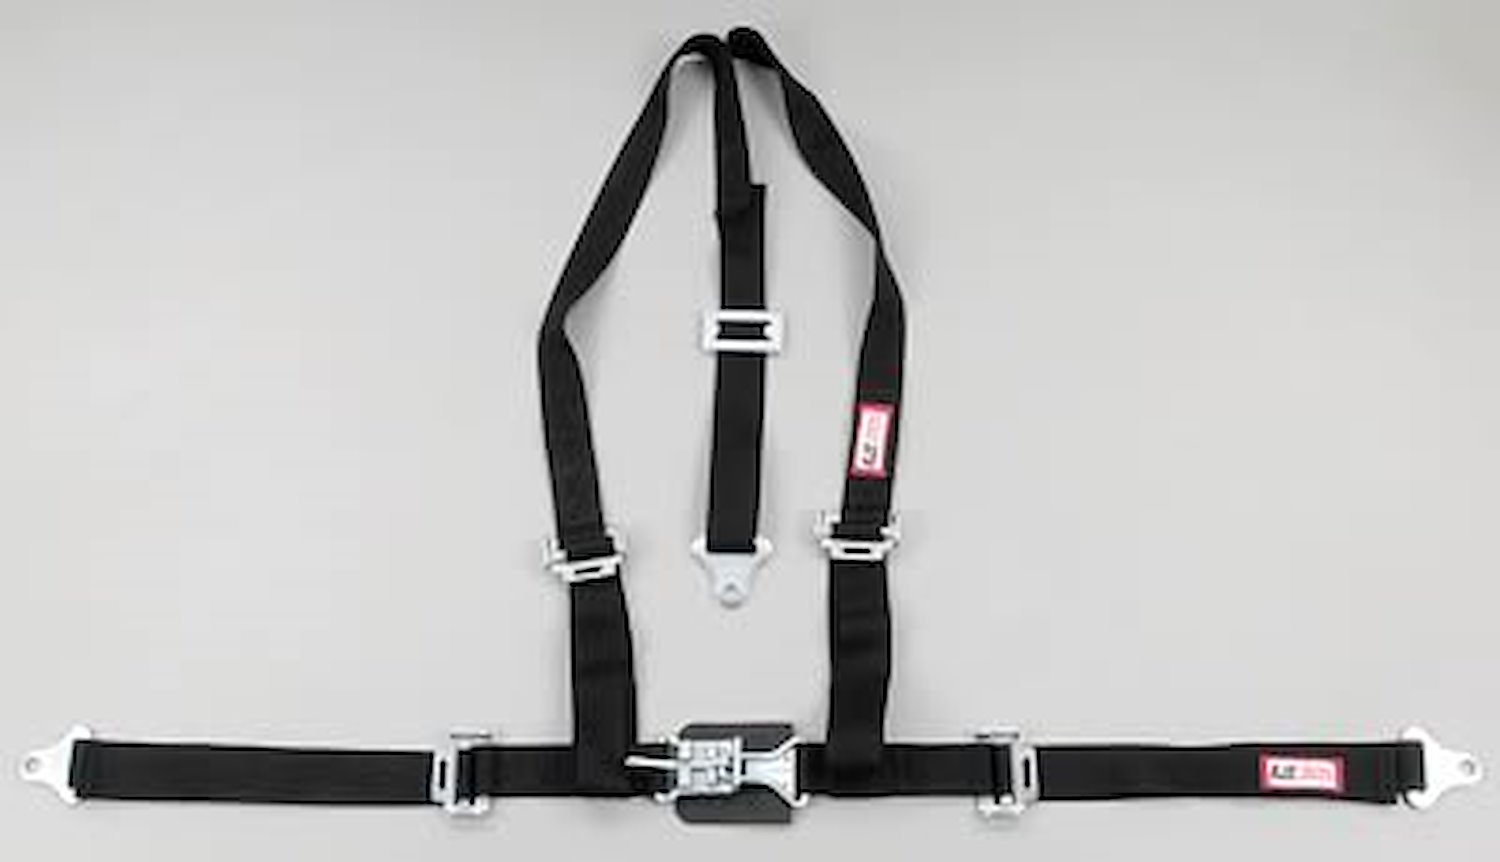 NON-SFI L&L HARNESS 2 PULL DOWN Lap Belt SEWN IN 2 S.H. V ROLL BAR Mount w/STERNUM STRAP ALL SNAP ENDS ORANGE